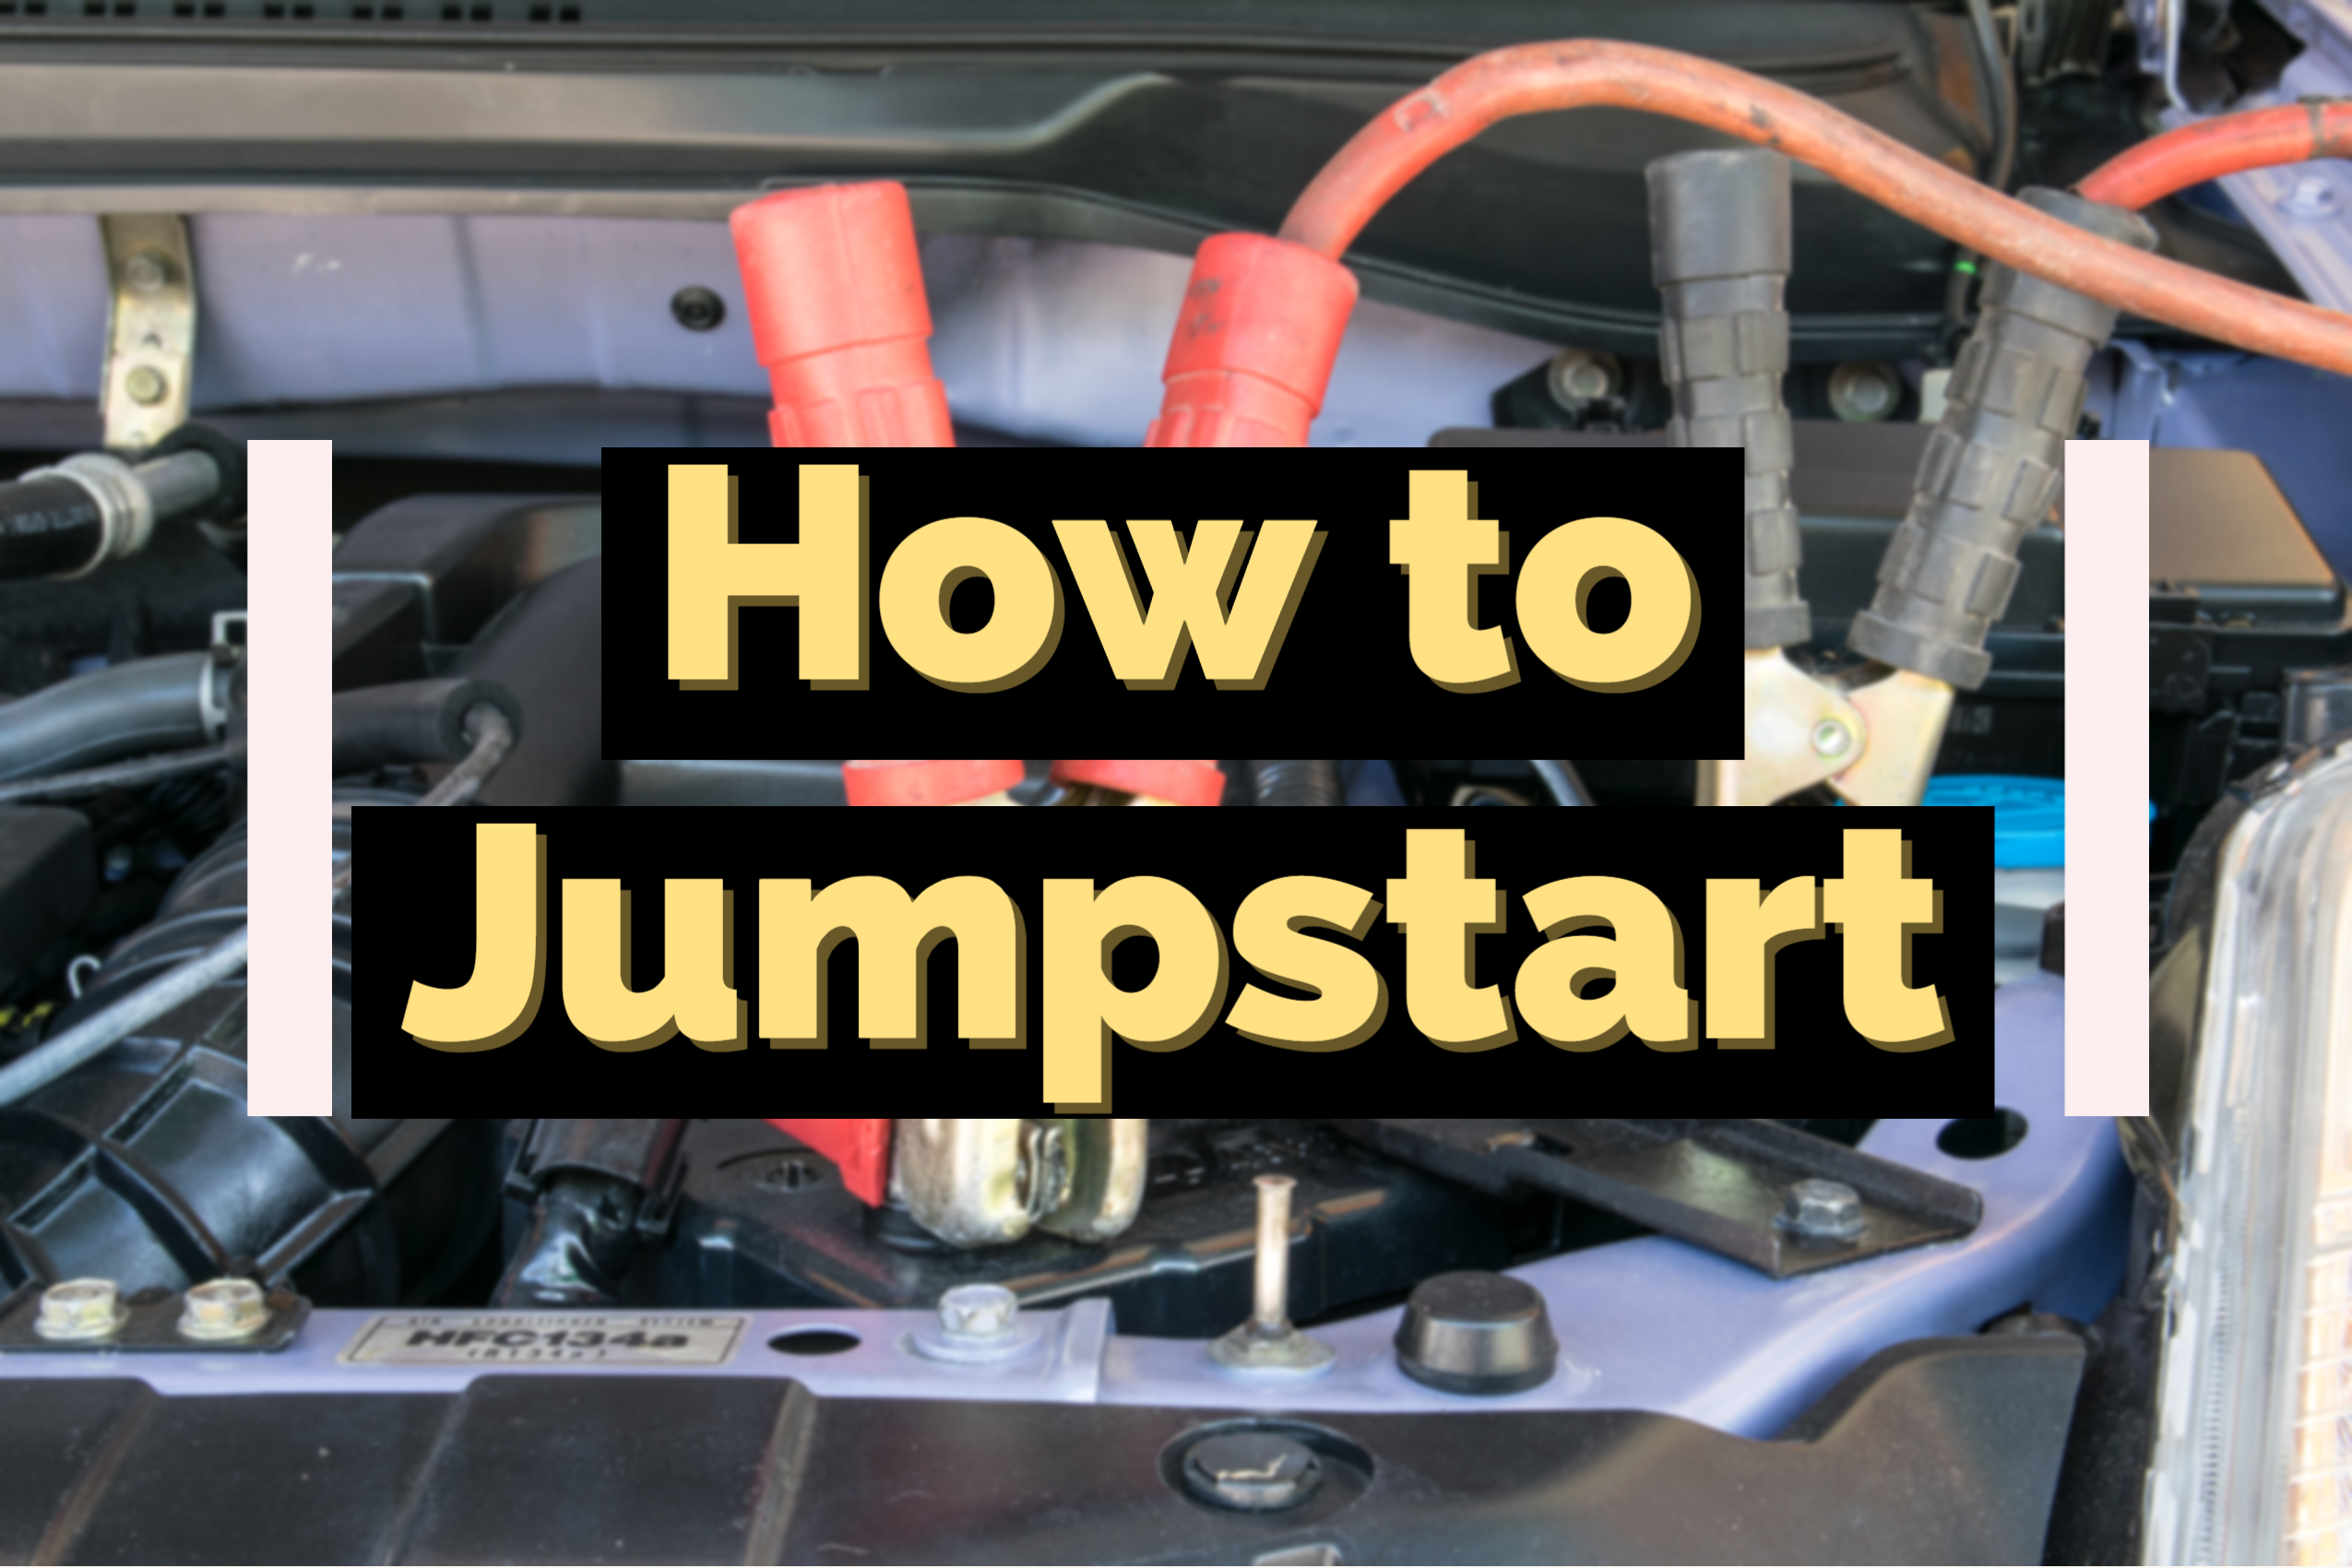 featured image on how to jumpstart with jumper cables attached to car battery in the background